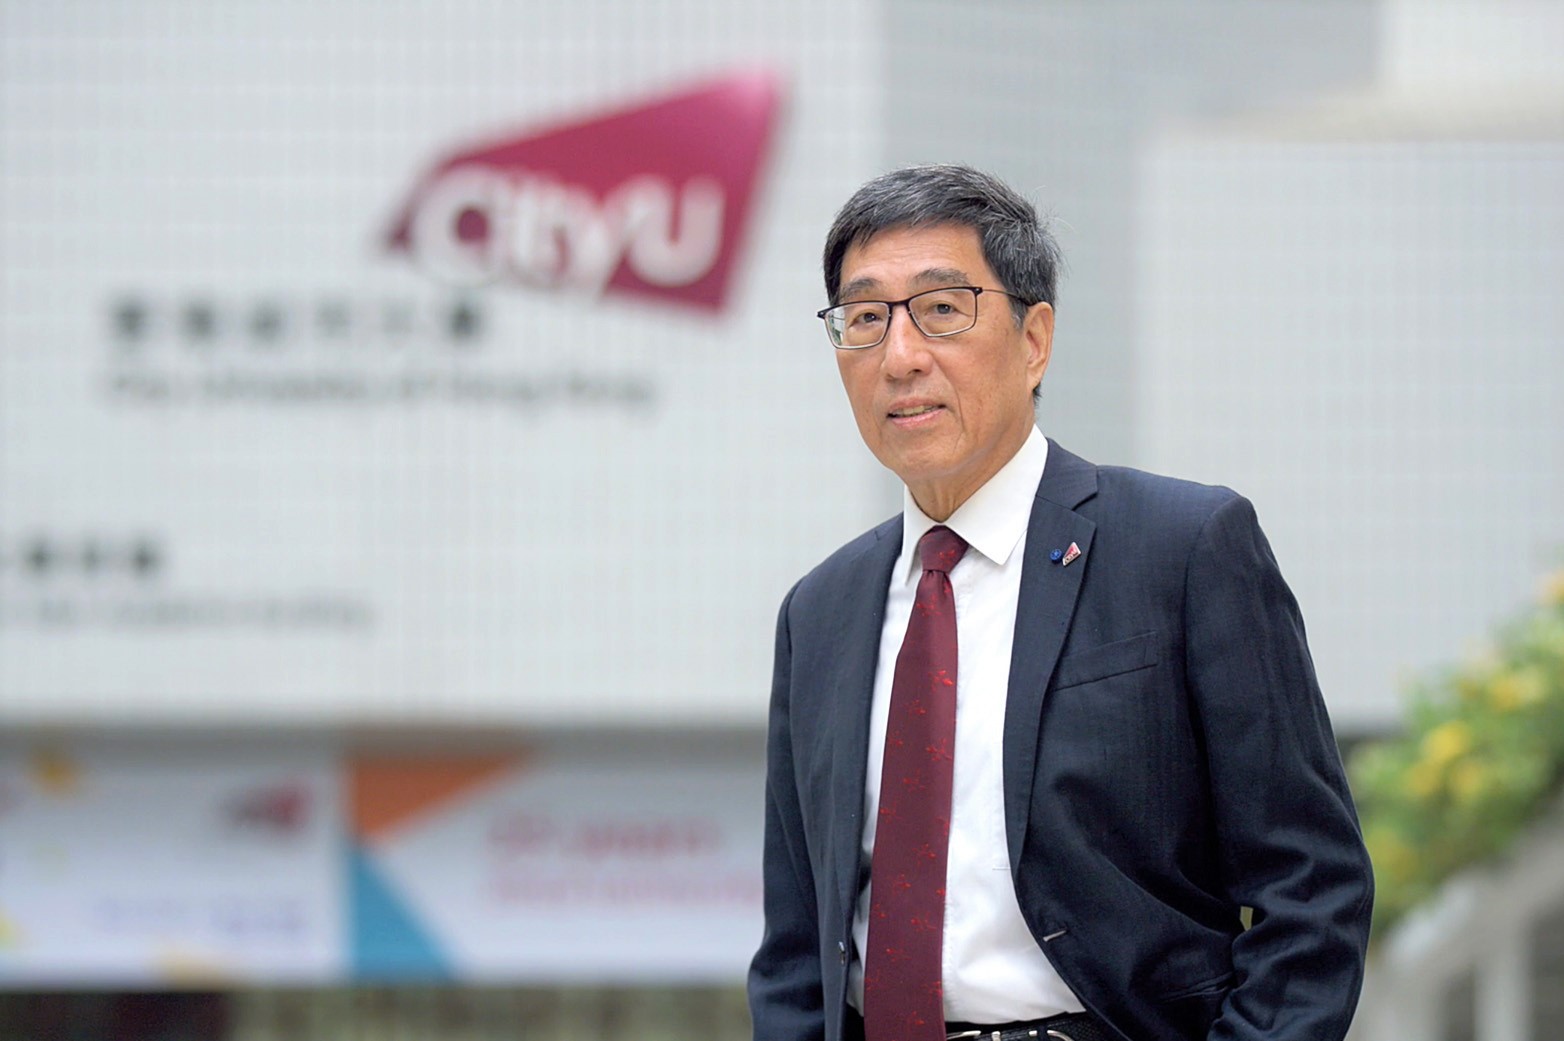 CityU will officially launch the series "Beyond Boundaries: Dialogue with Presidents of World’s Leading Educational Institutions”, hosted by President Kuo.